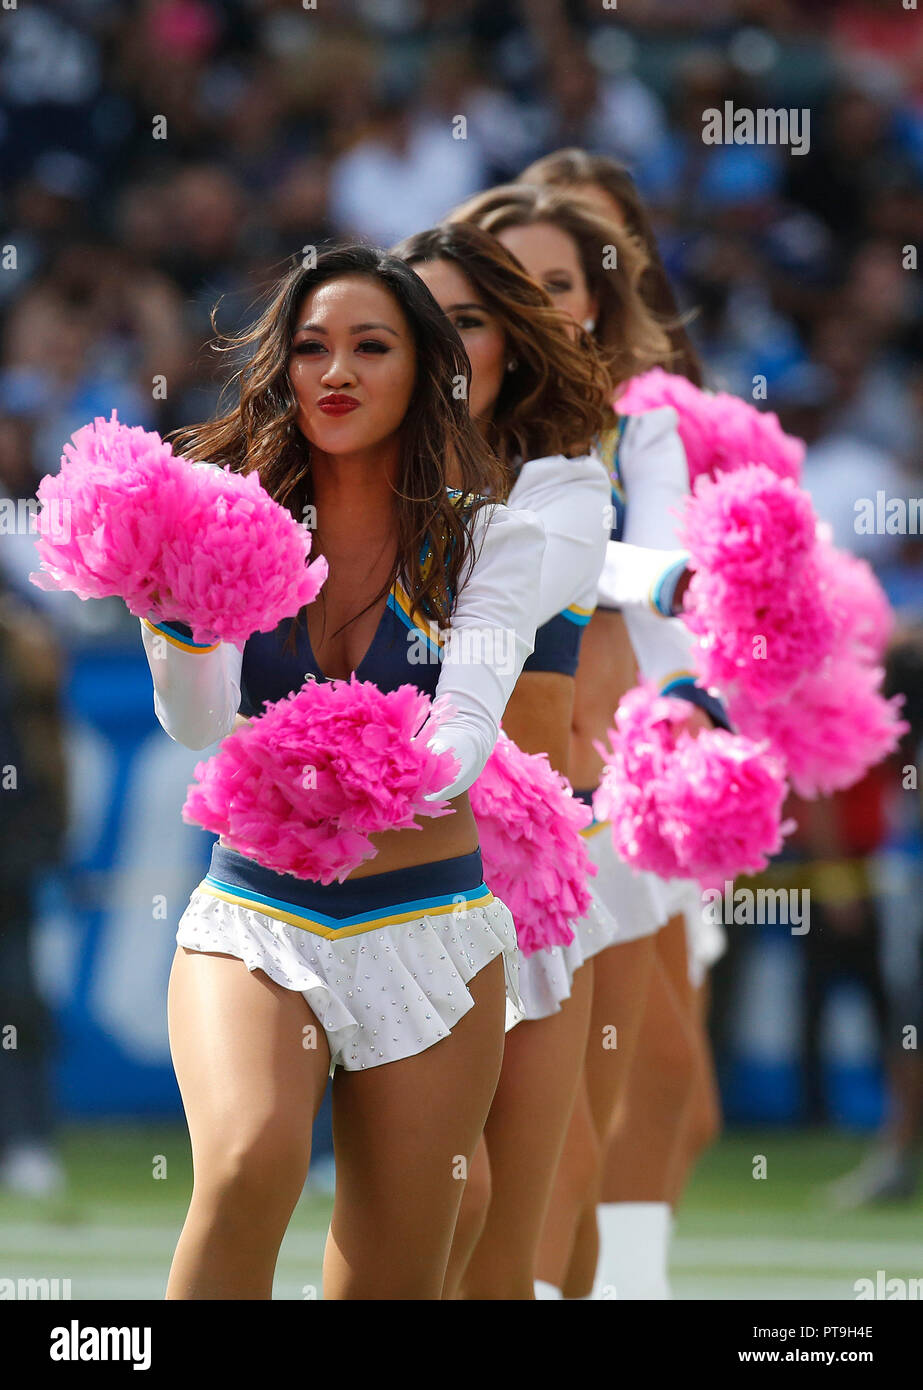 Los Angeles, USA. October 07, 2018 Los Angeles Chargers cheerleaders in action during the football game between the Oakland Raiders and the Los Angeles Chargers at the StubHub Center in Carson, California. Charles Baus/CSM Credit: Cal Sport Media/Alamy Live News Stock Photo